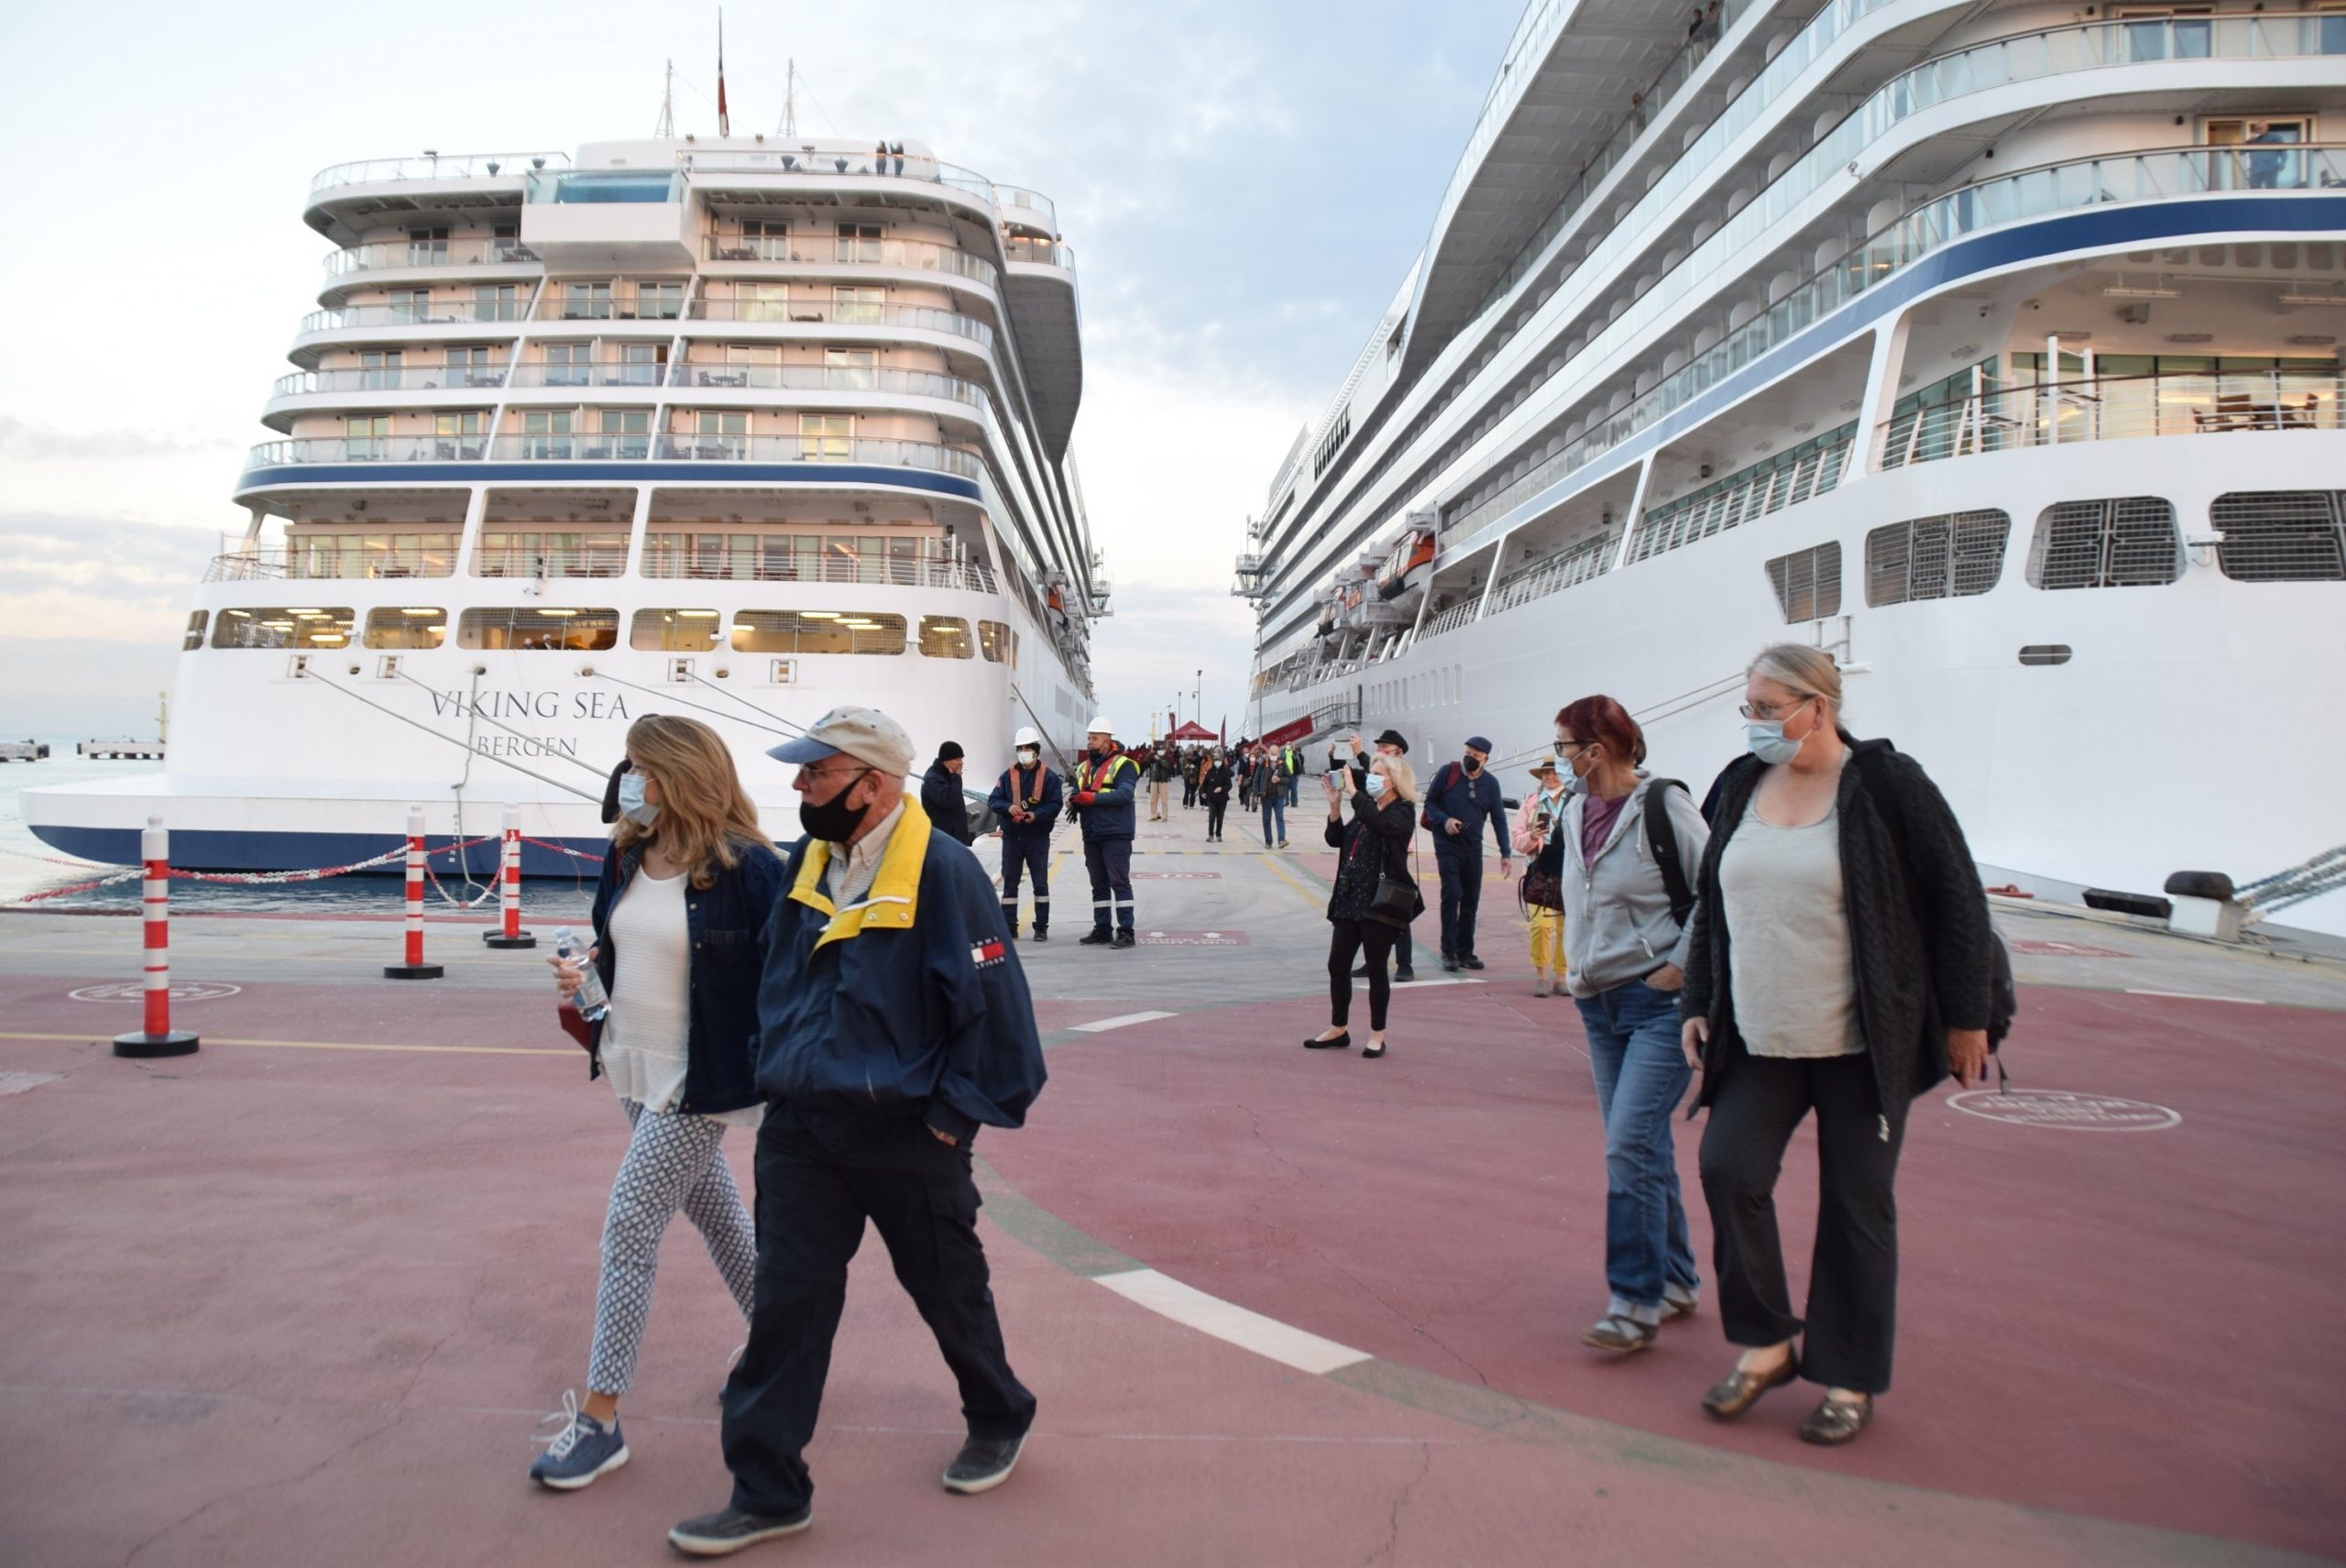 Kuşadası welcomed two more cruise ships on Saturday